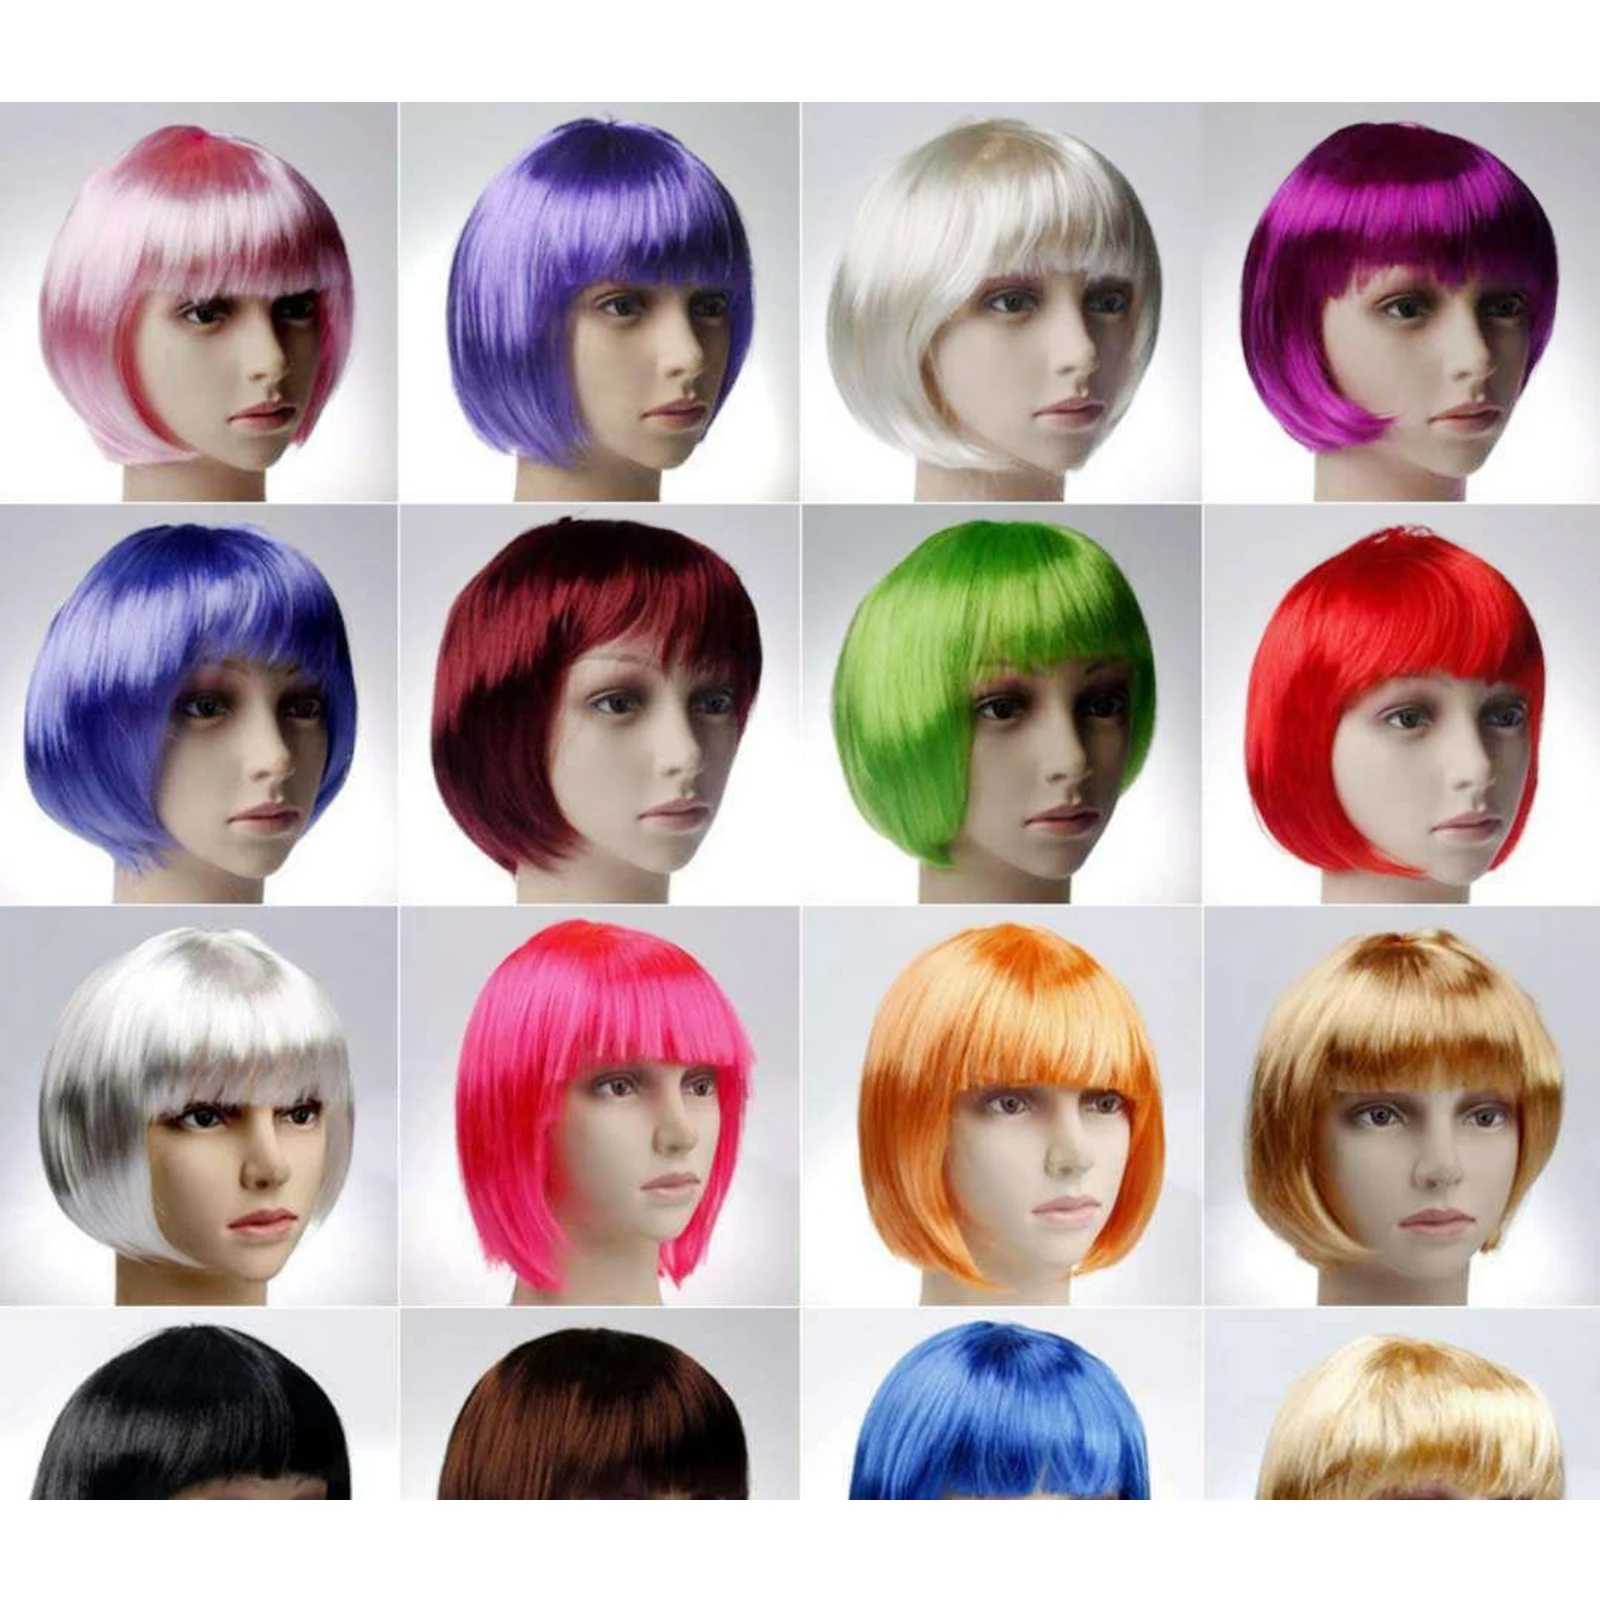 Short Bob Style Wig Women`s Short Straight Full Hair Wig Cosplay 12 Colors Wig